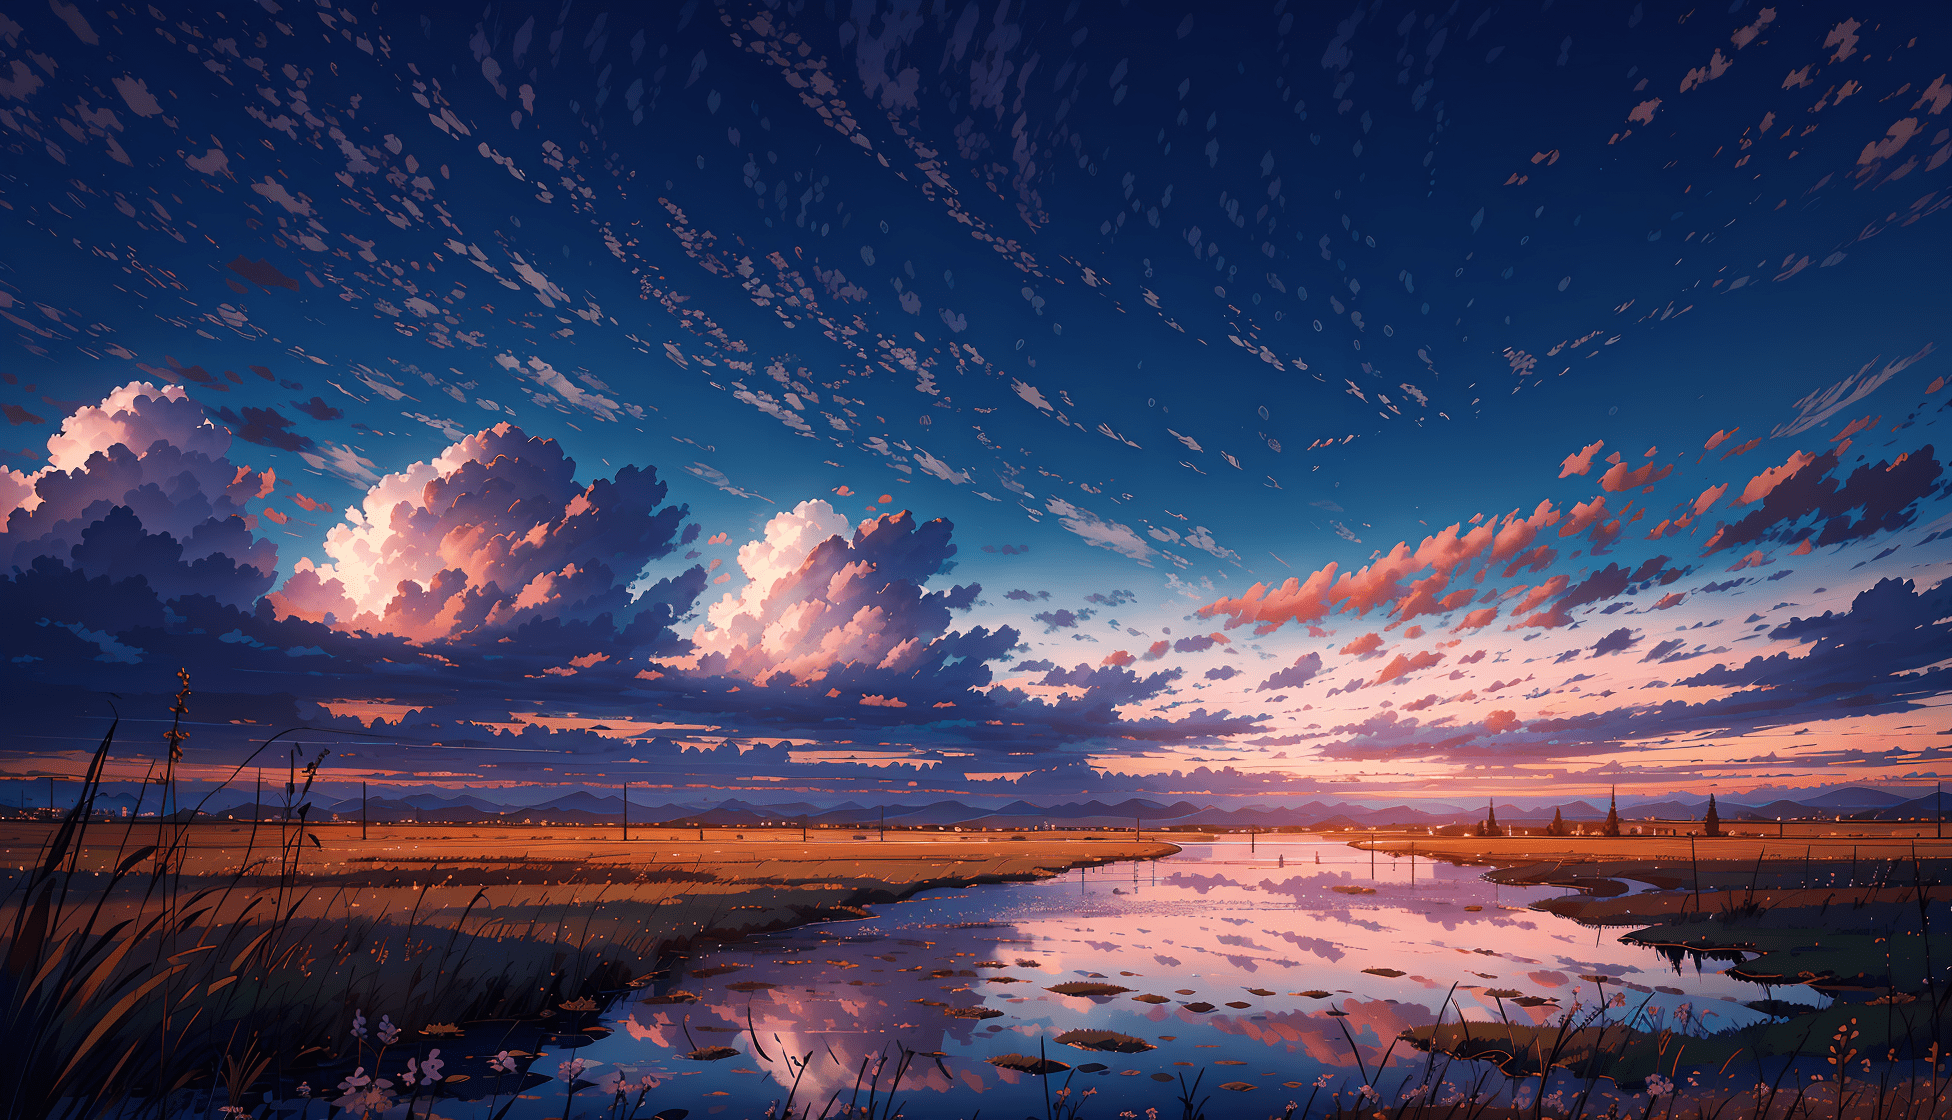 A beautiful anime landscape with a river and clouds in the sky - Anime landscape